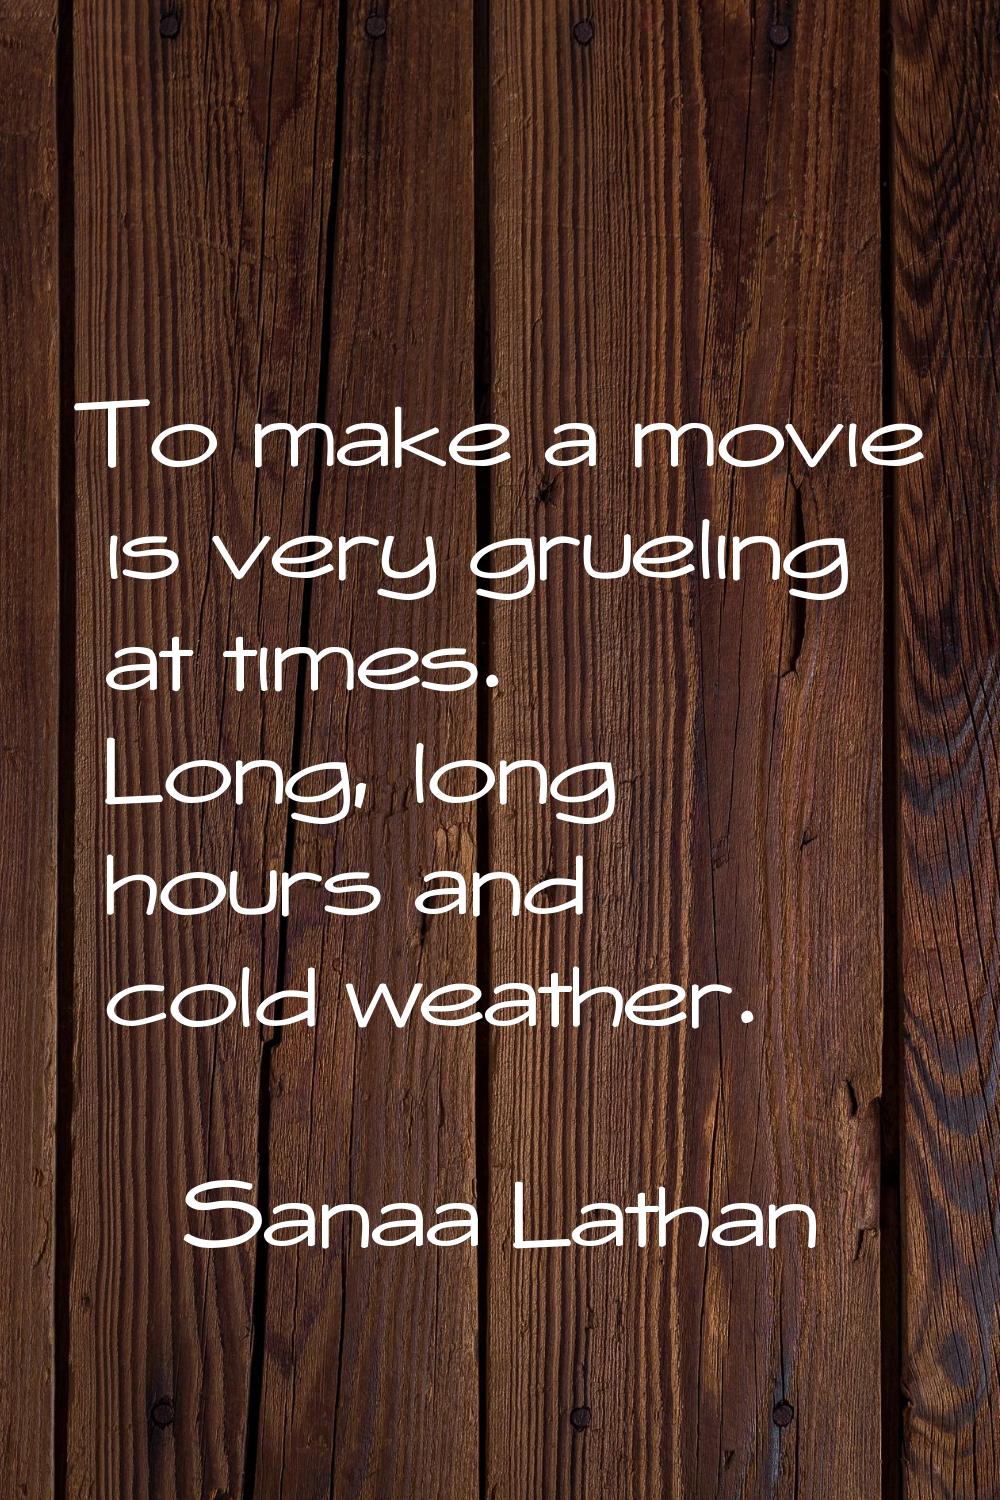 To make a movie is very grueling at times. Long, long hours and cold weather.